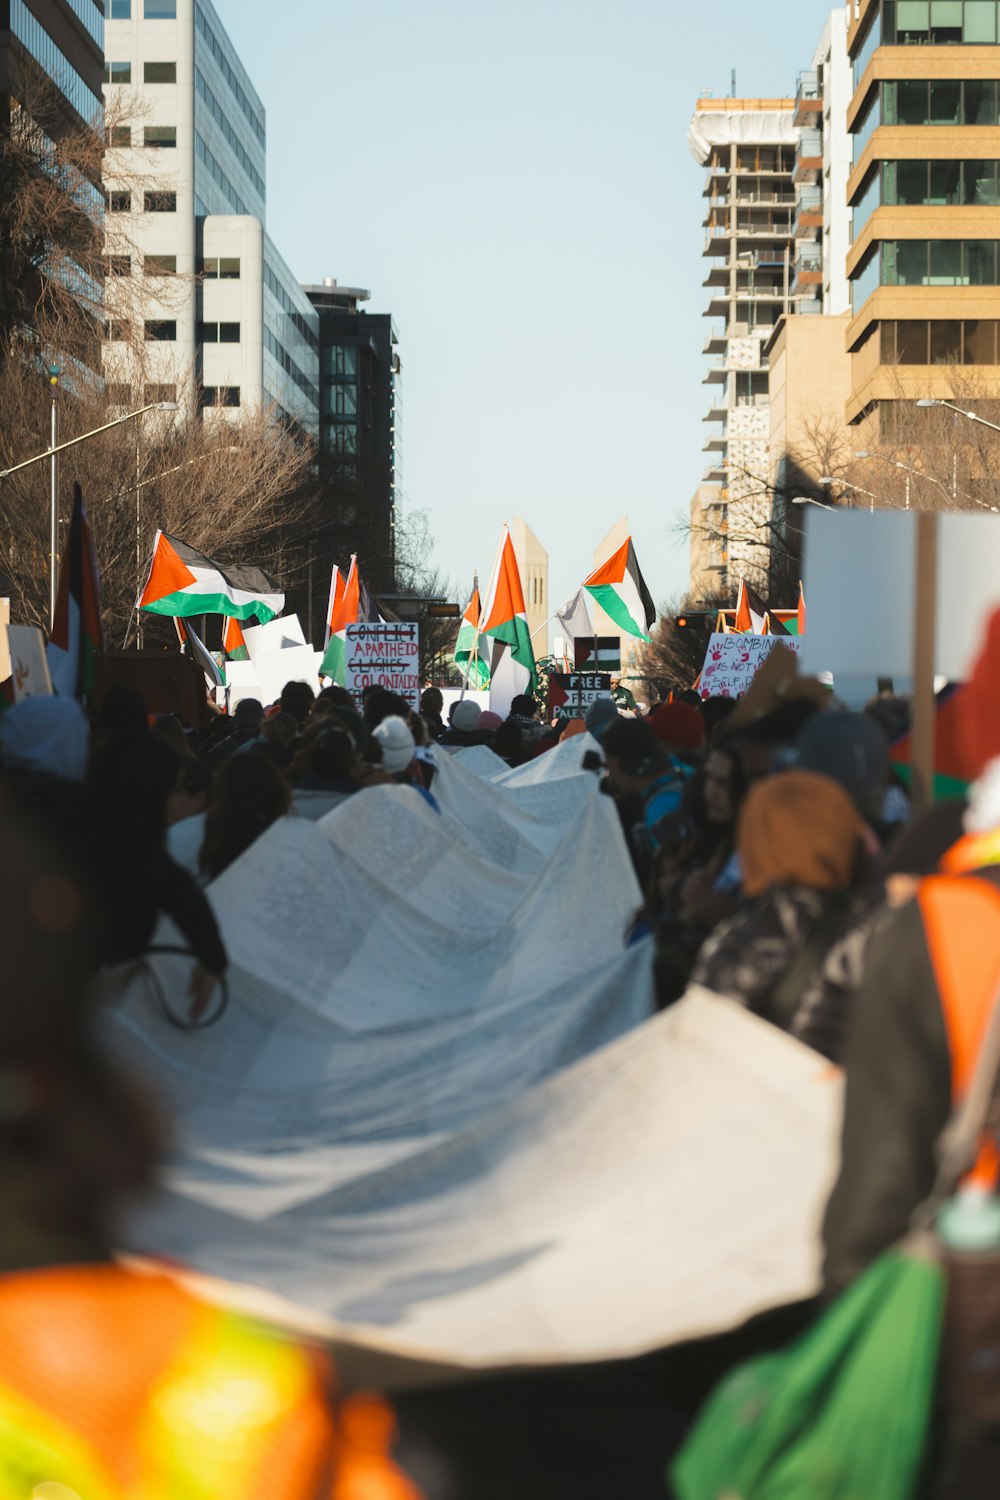 a large group of people holding orange and green flags